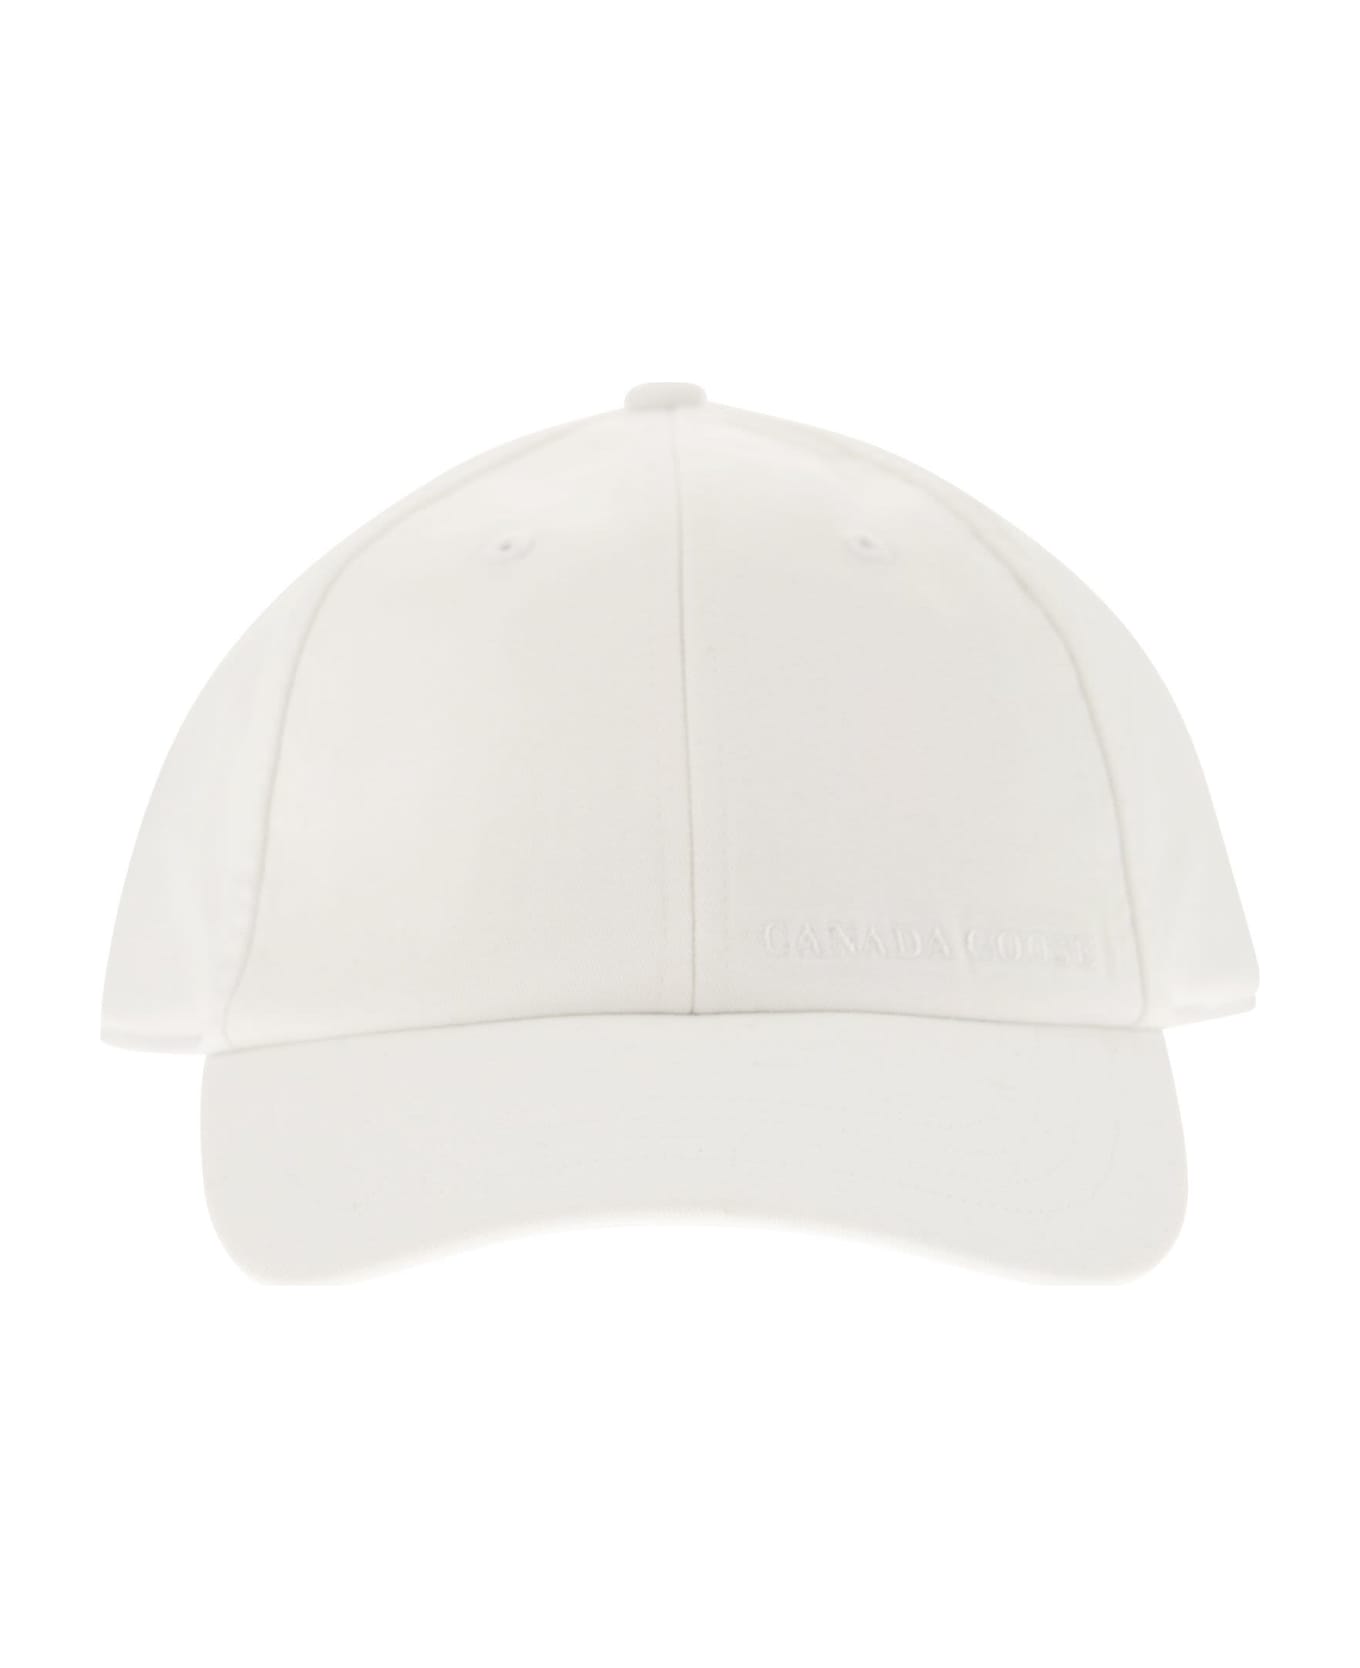 Canada Goose Hat With Visor - White 帽子